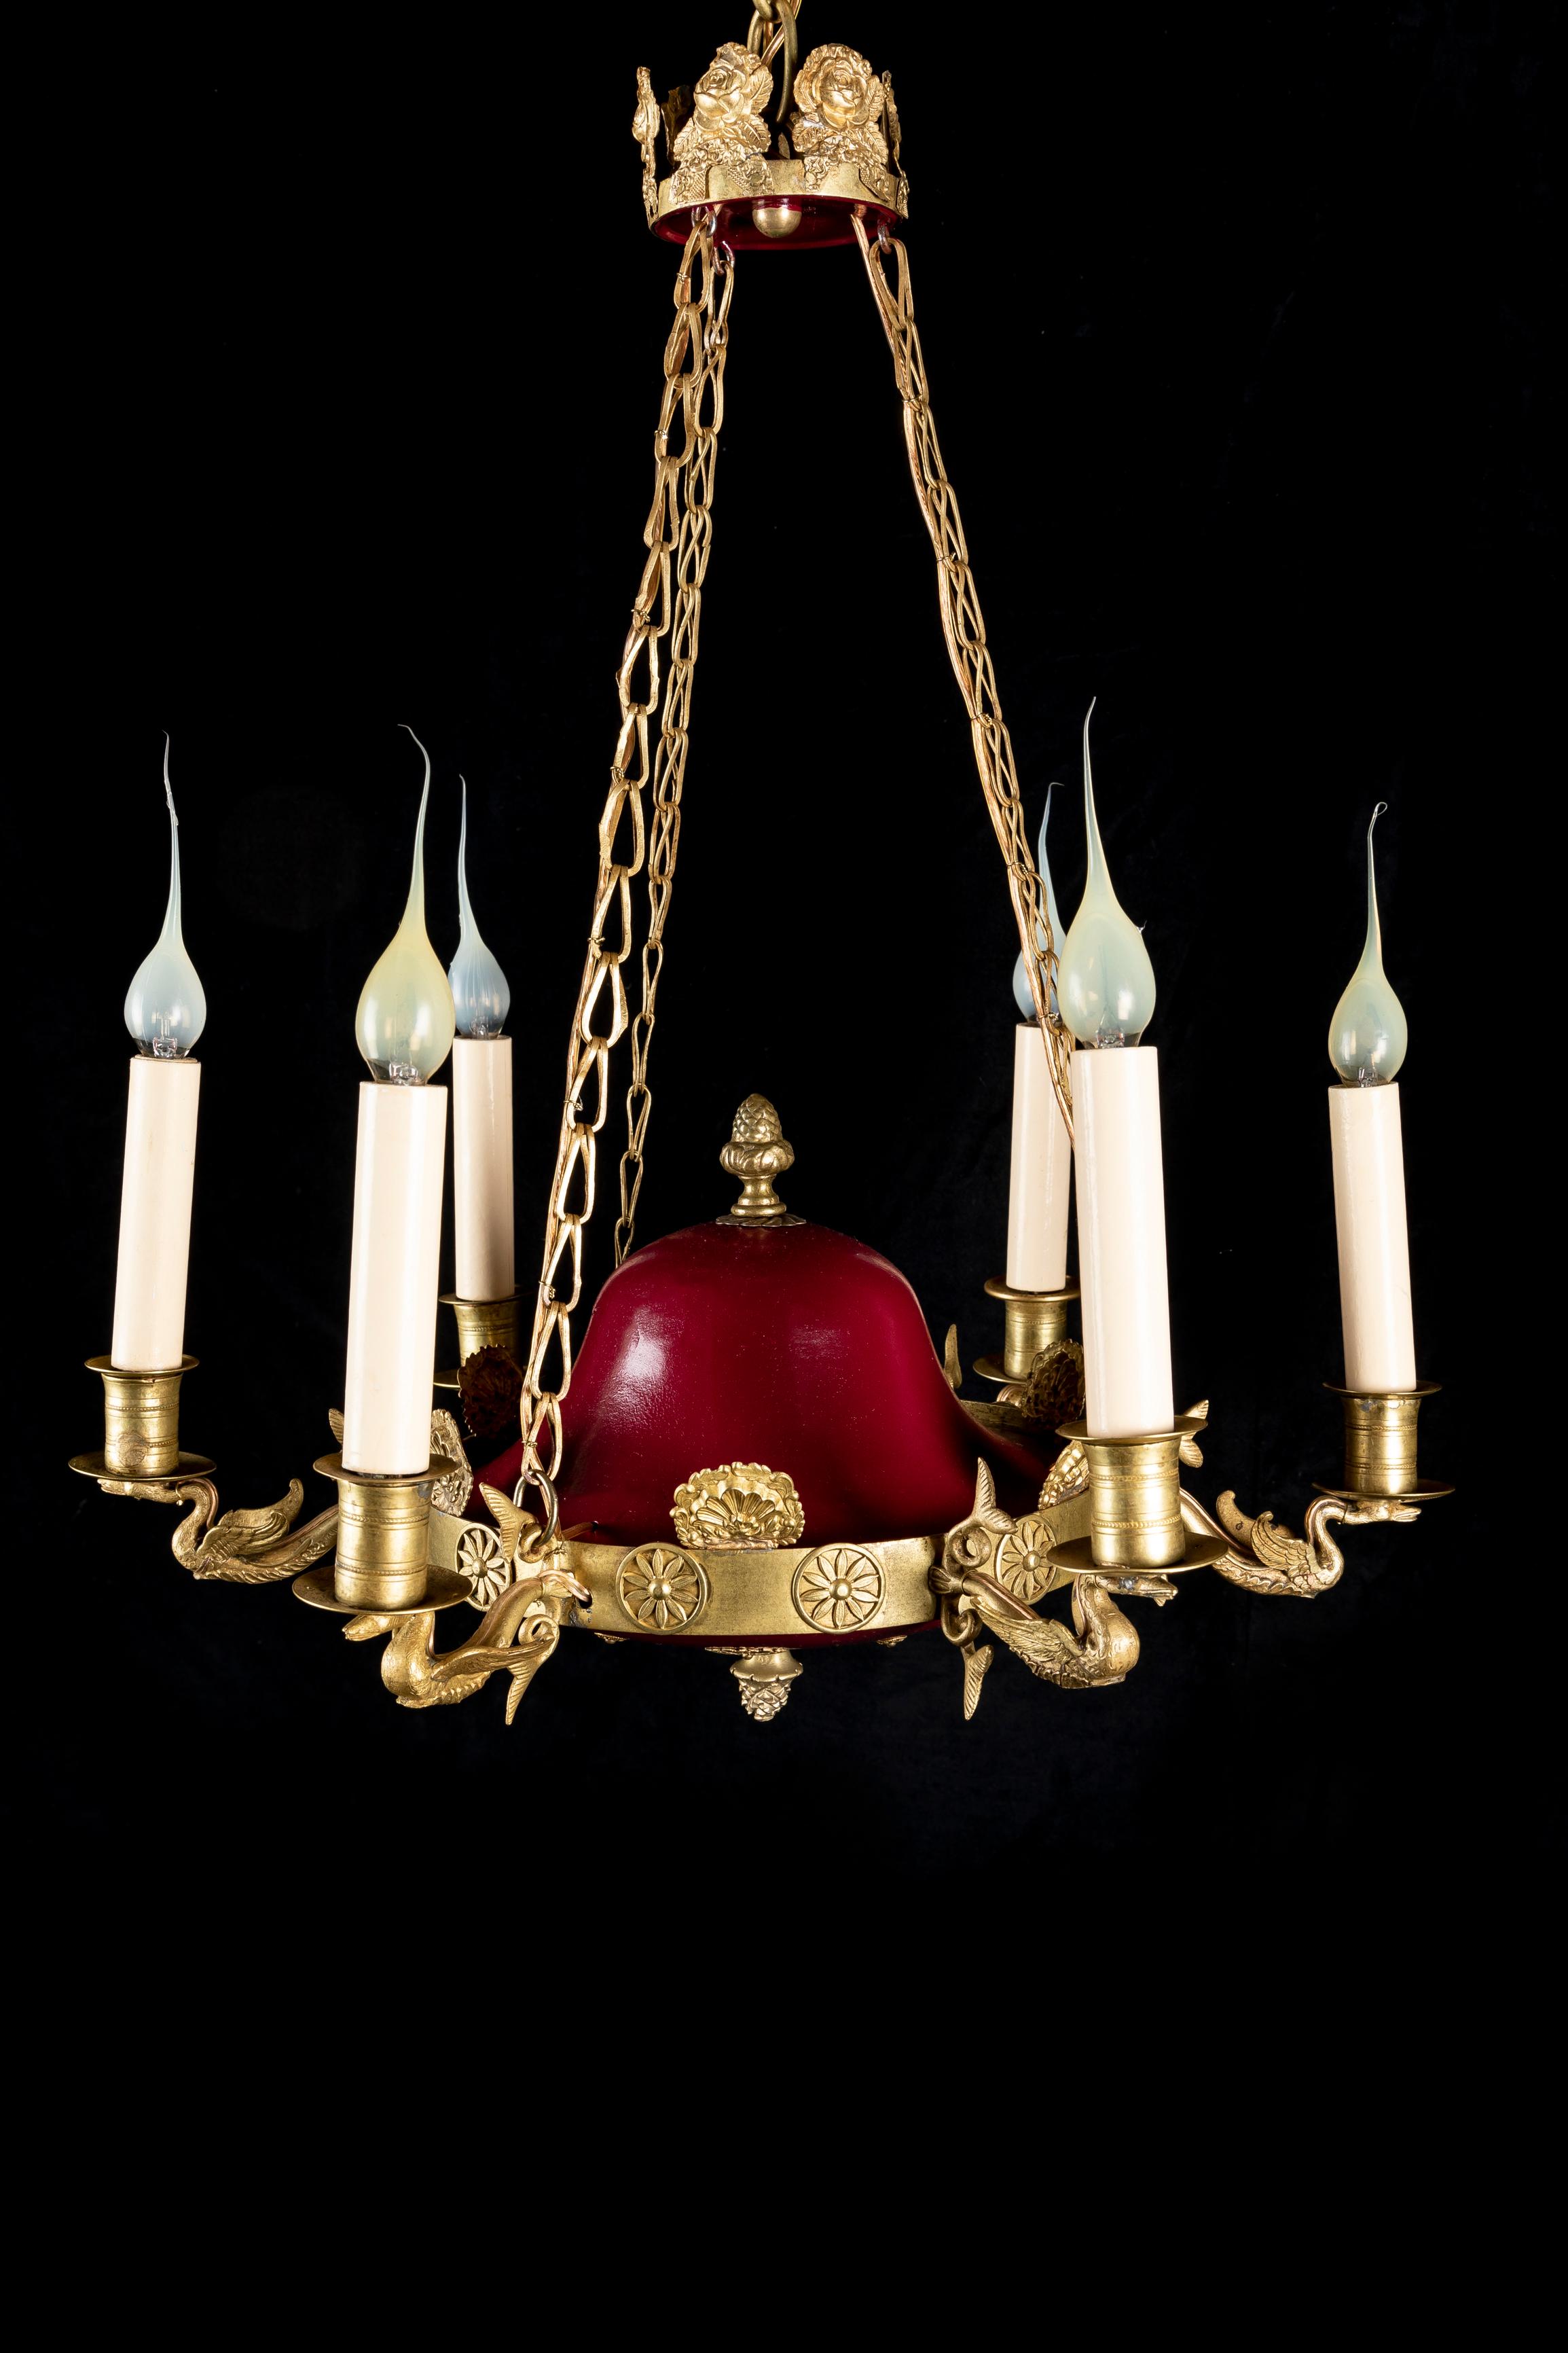 A FIne French Empire Style GIlt Bronze and red painted tole six light swan chandelier embellished with neoclassical gilt bronze motifs in relief, six gilt bronze swans. This unusual chandelier is further adorned with gilt bronze chains and a